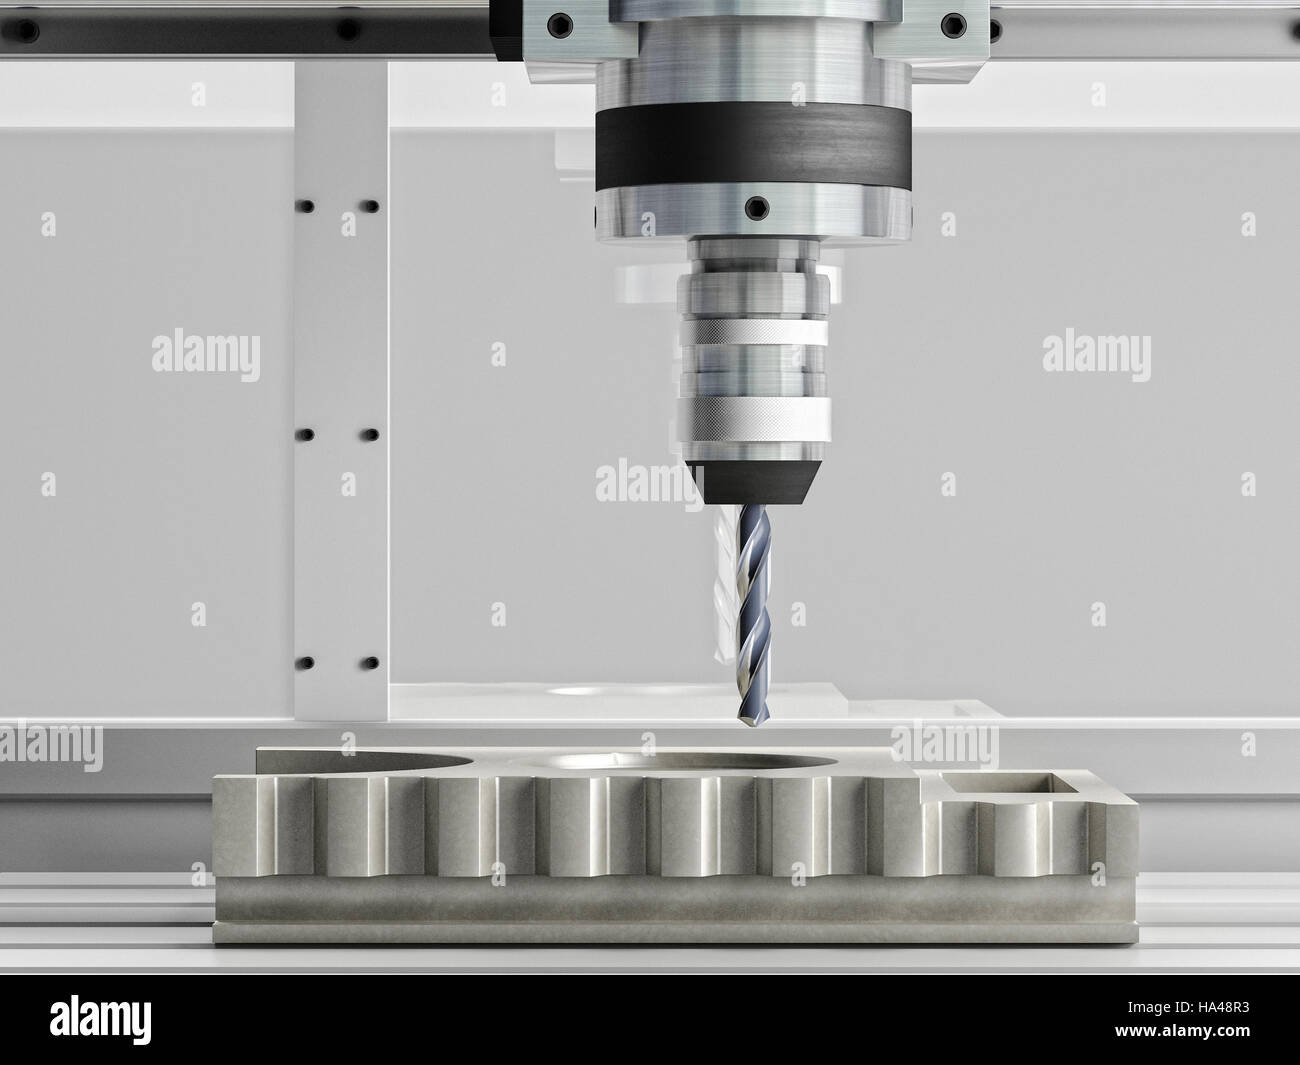 cnc machine in action 3d rendering Stock Photo